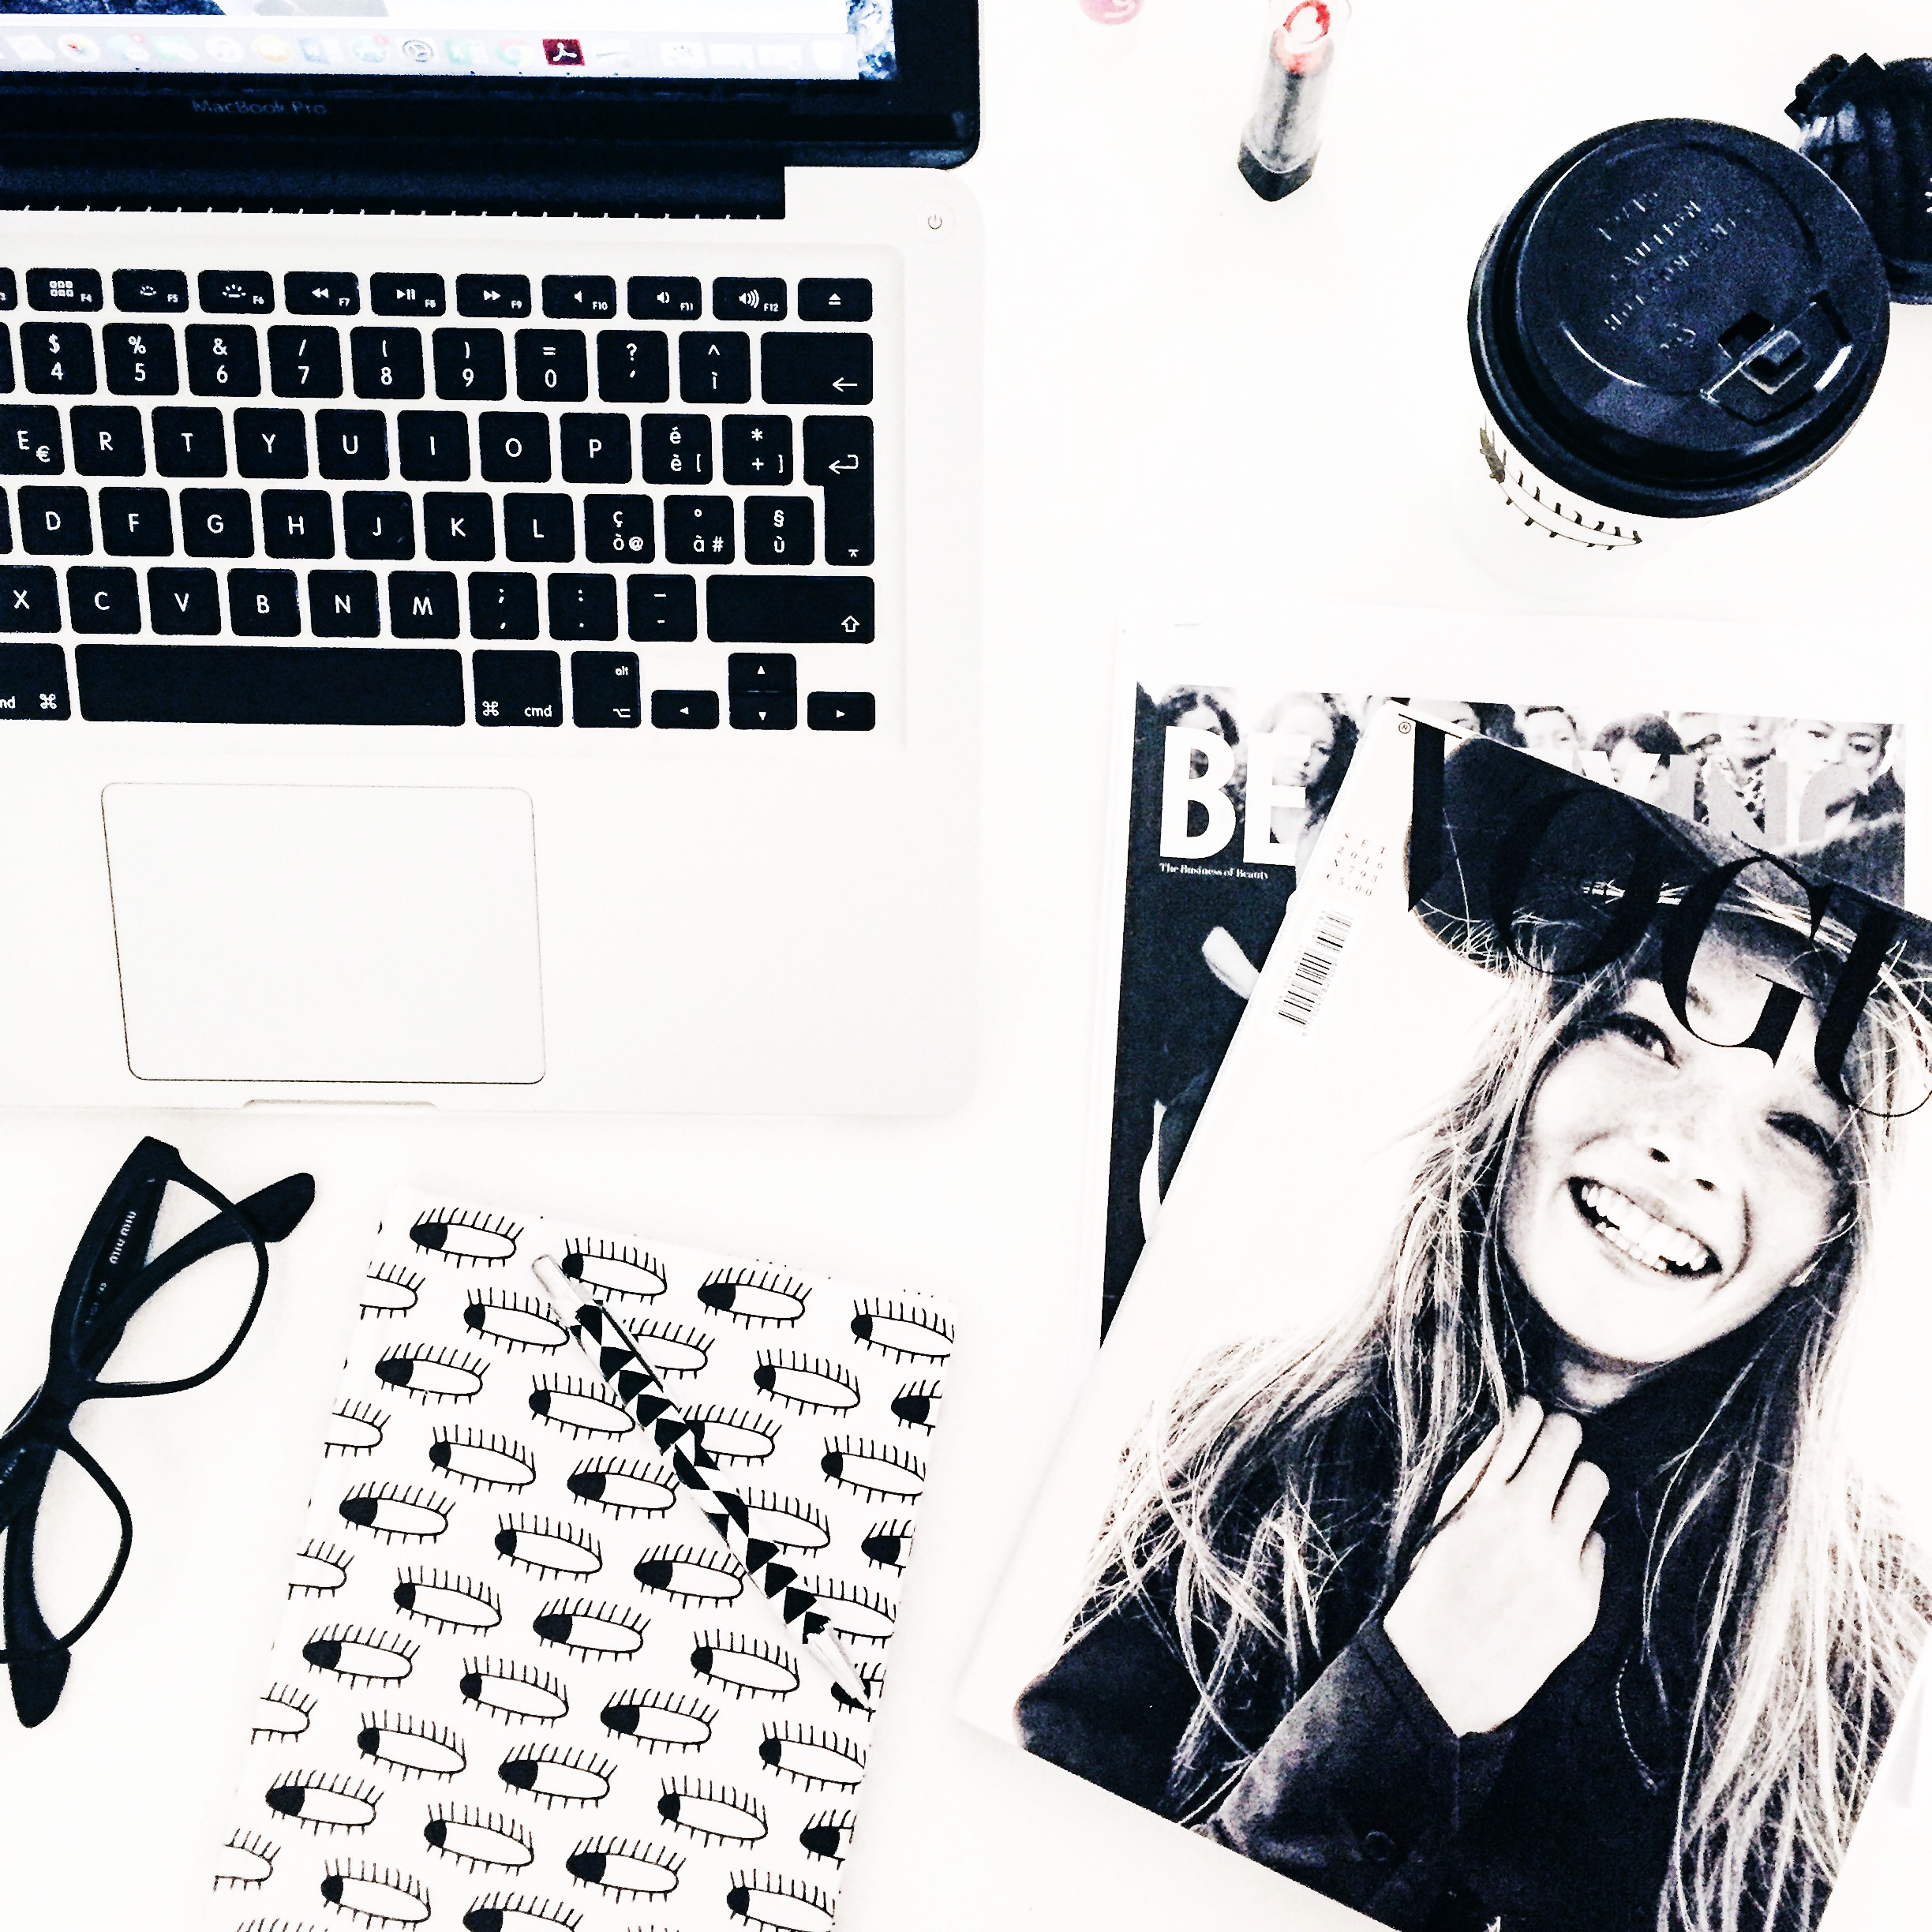 Behind the Scenes of Fashion Blogging: All Your Questions